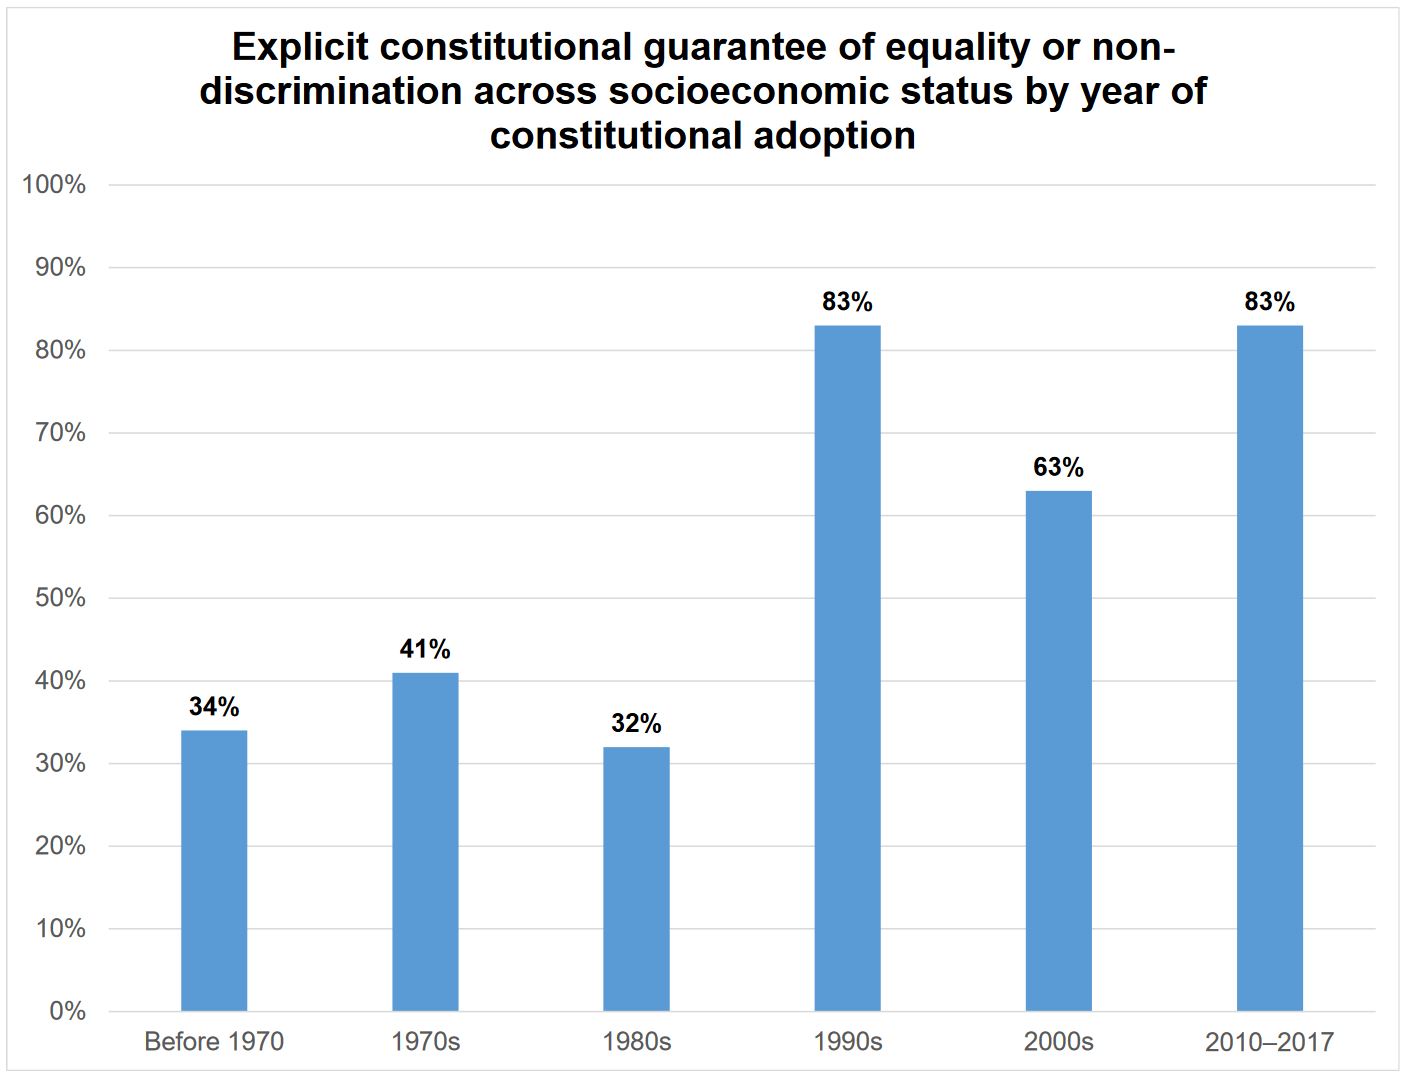 Chart: Explicit constitutional guarantee of equality or non-discrimination on the basis of socioeconomic status